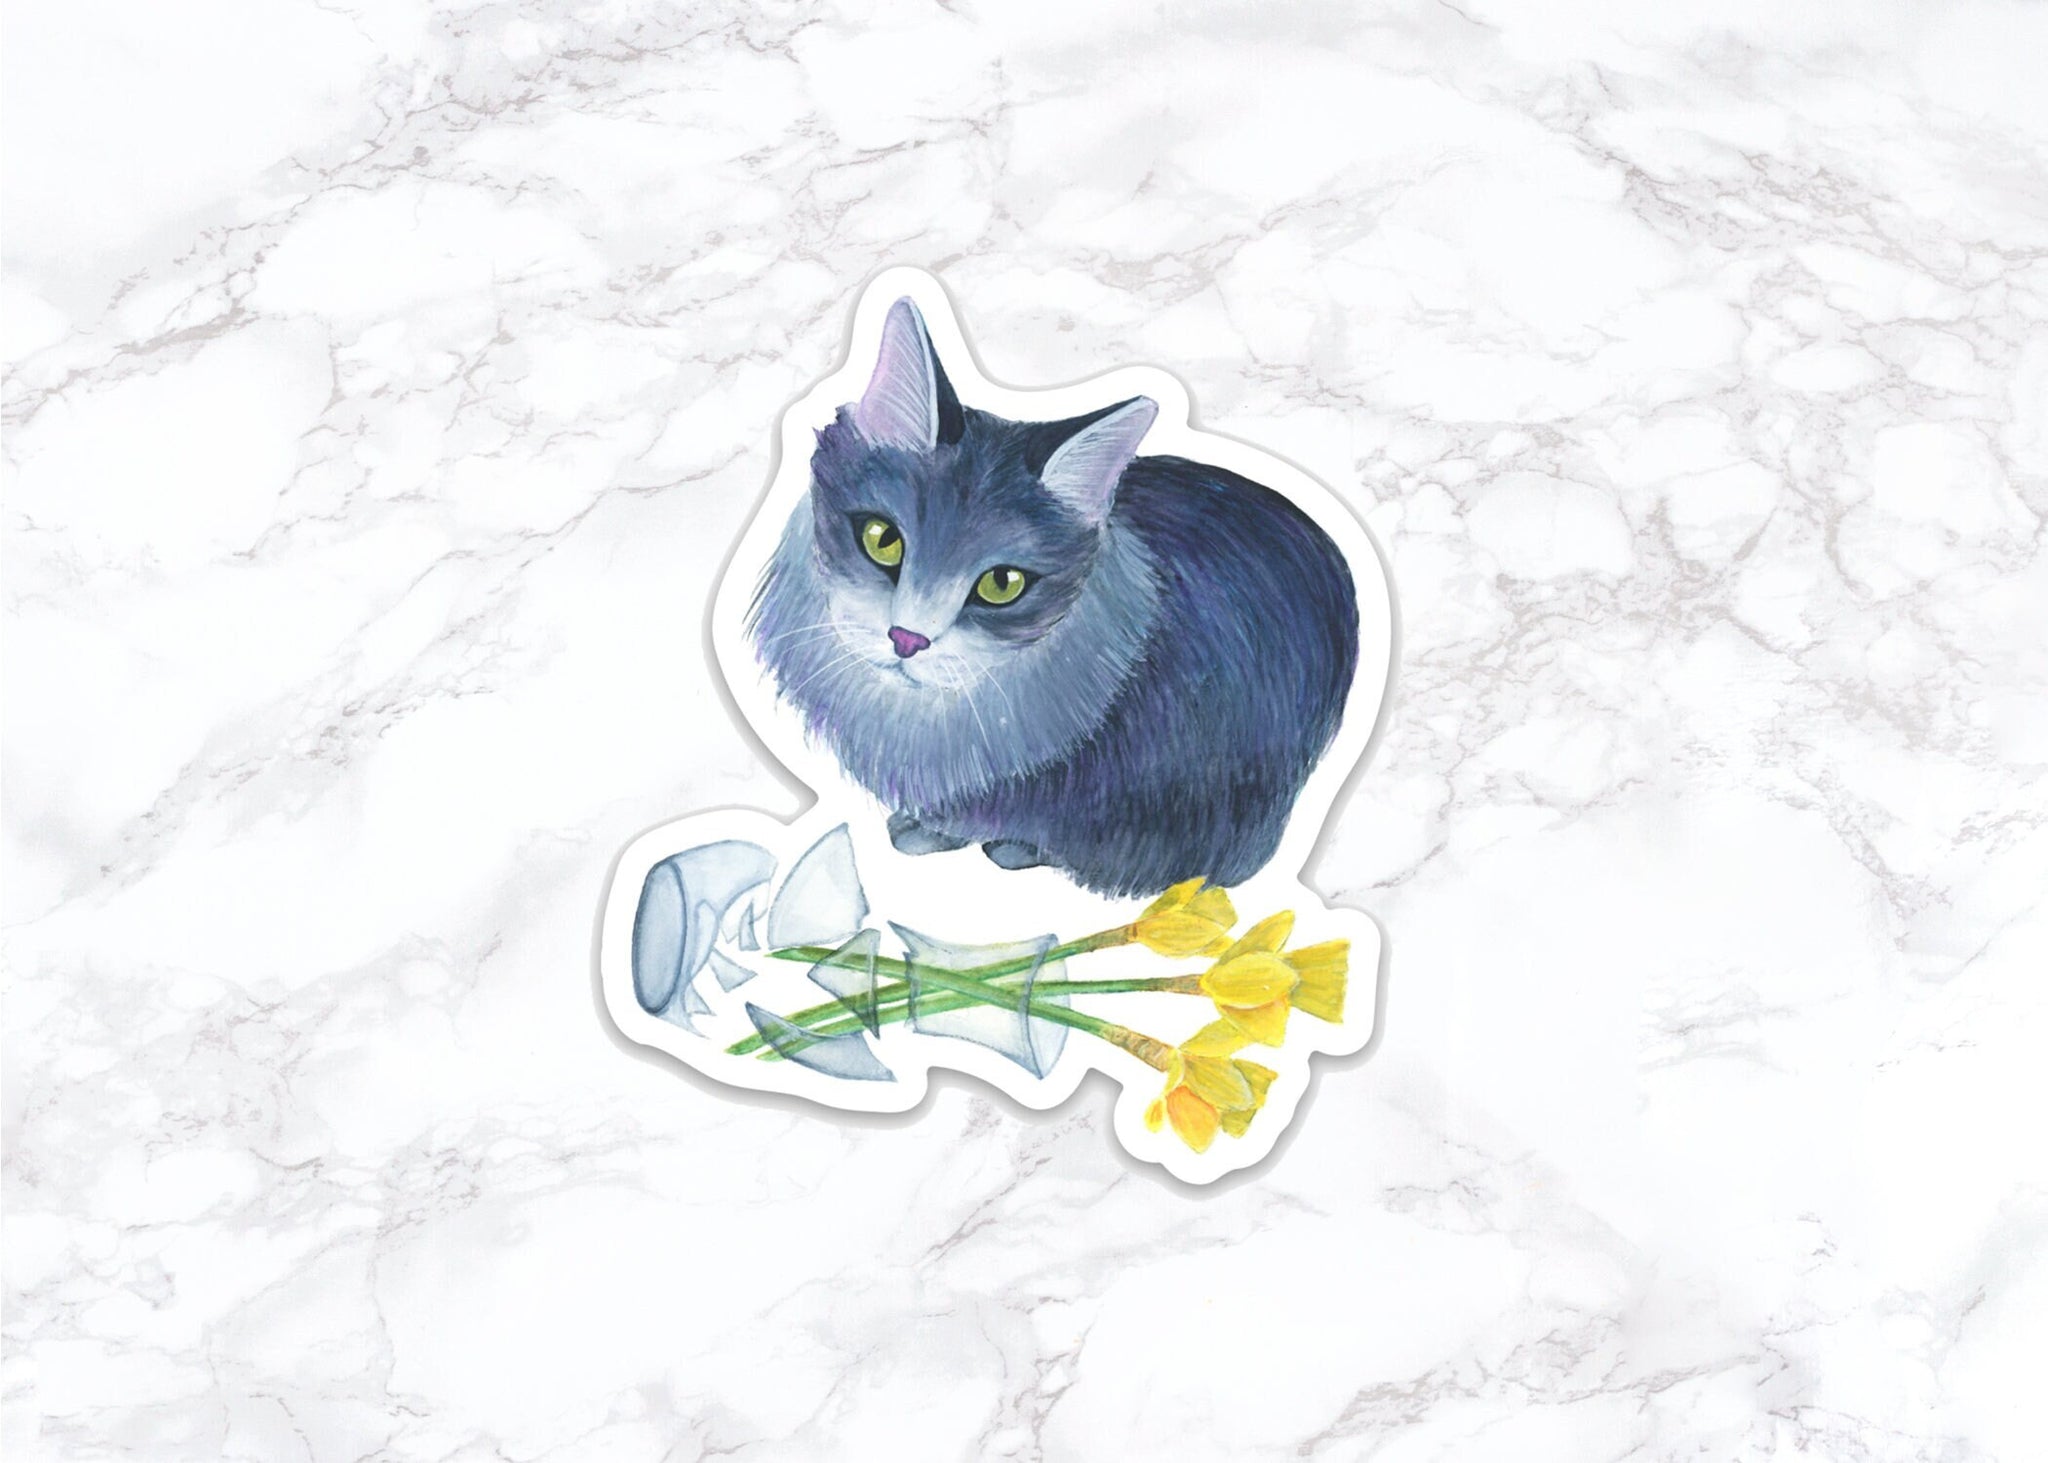 Cat with Broken Vase, Funny Cat Sticker, Water Bottle Stickers, Laptop Stickers, Laptop Decals, Funny Stickers, Watercolor Stickers